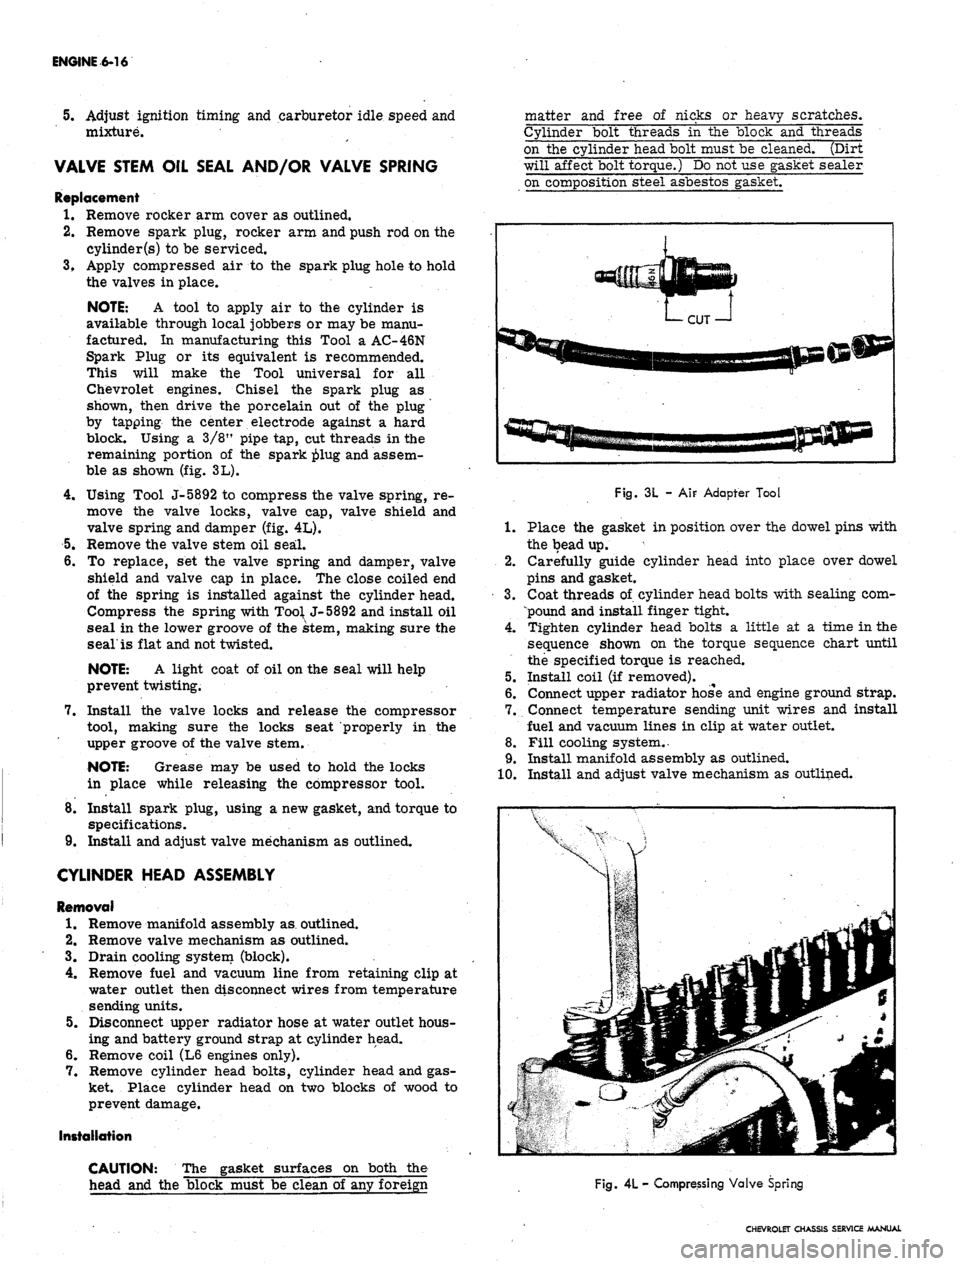 CHEVROLET CAMARO 1967 1.G Chassis Manual PDF 
ENGINE 6-16

5.
 Adjust ignition timing and carburetor idle speed and

mixture.

VALVE STEM OIL SEAL AND/OR VALVE SPRING

Replacement

1.
 Remove rocker arm cover as outlined.

2.
 Remove spark plug,